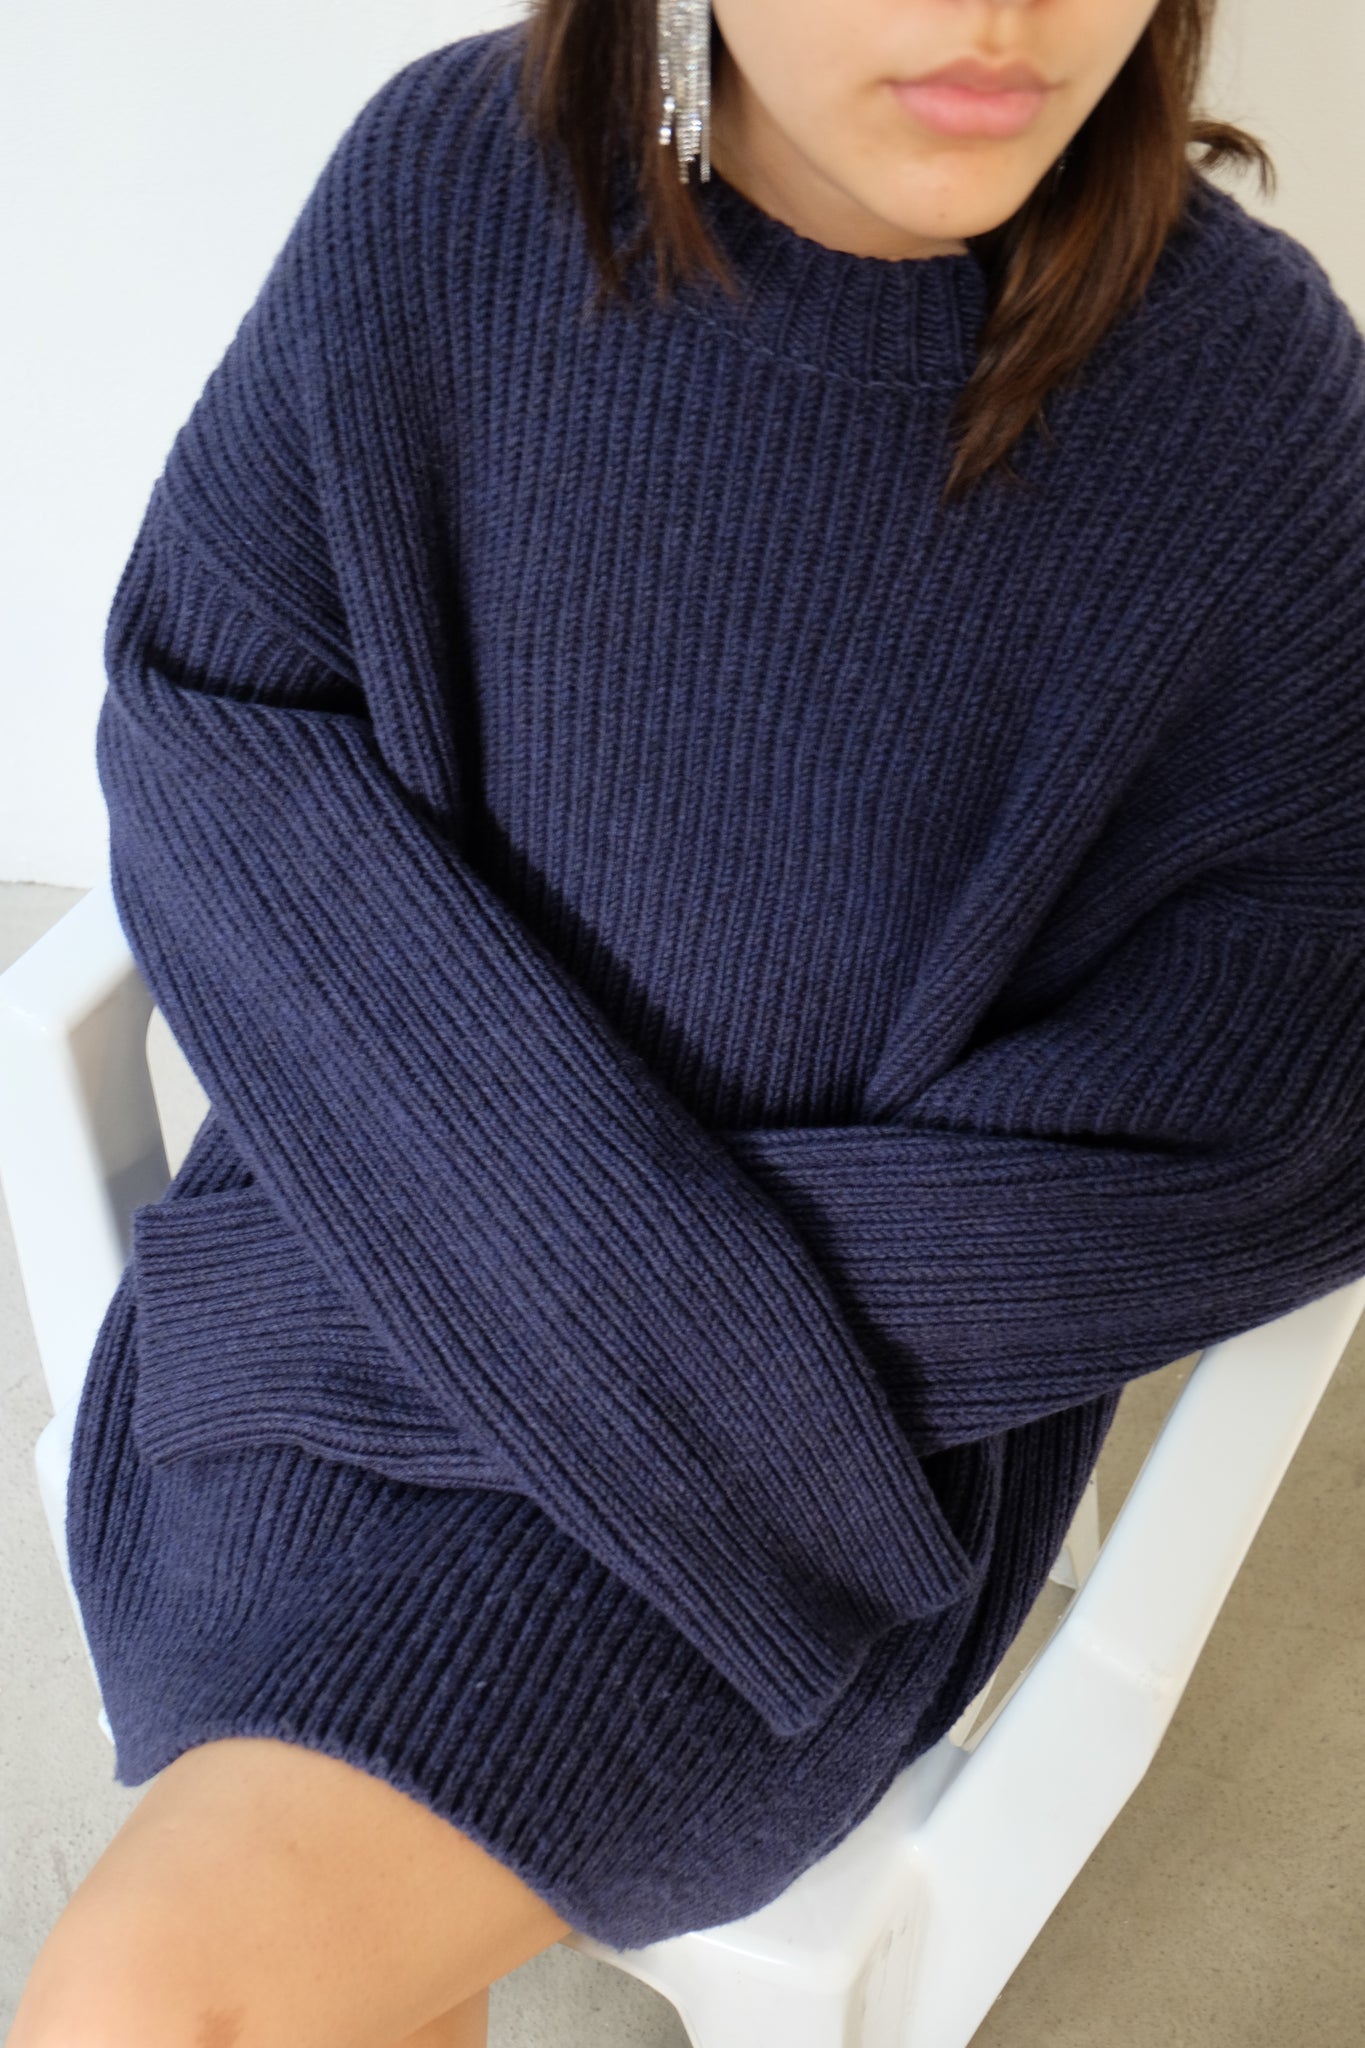 BLUE RIB KNIT OVERSIZED BY CAN PEP REY – BEYOND STUDIOS